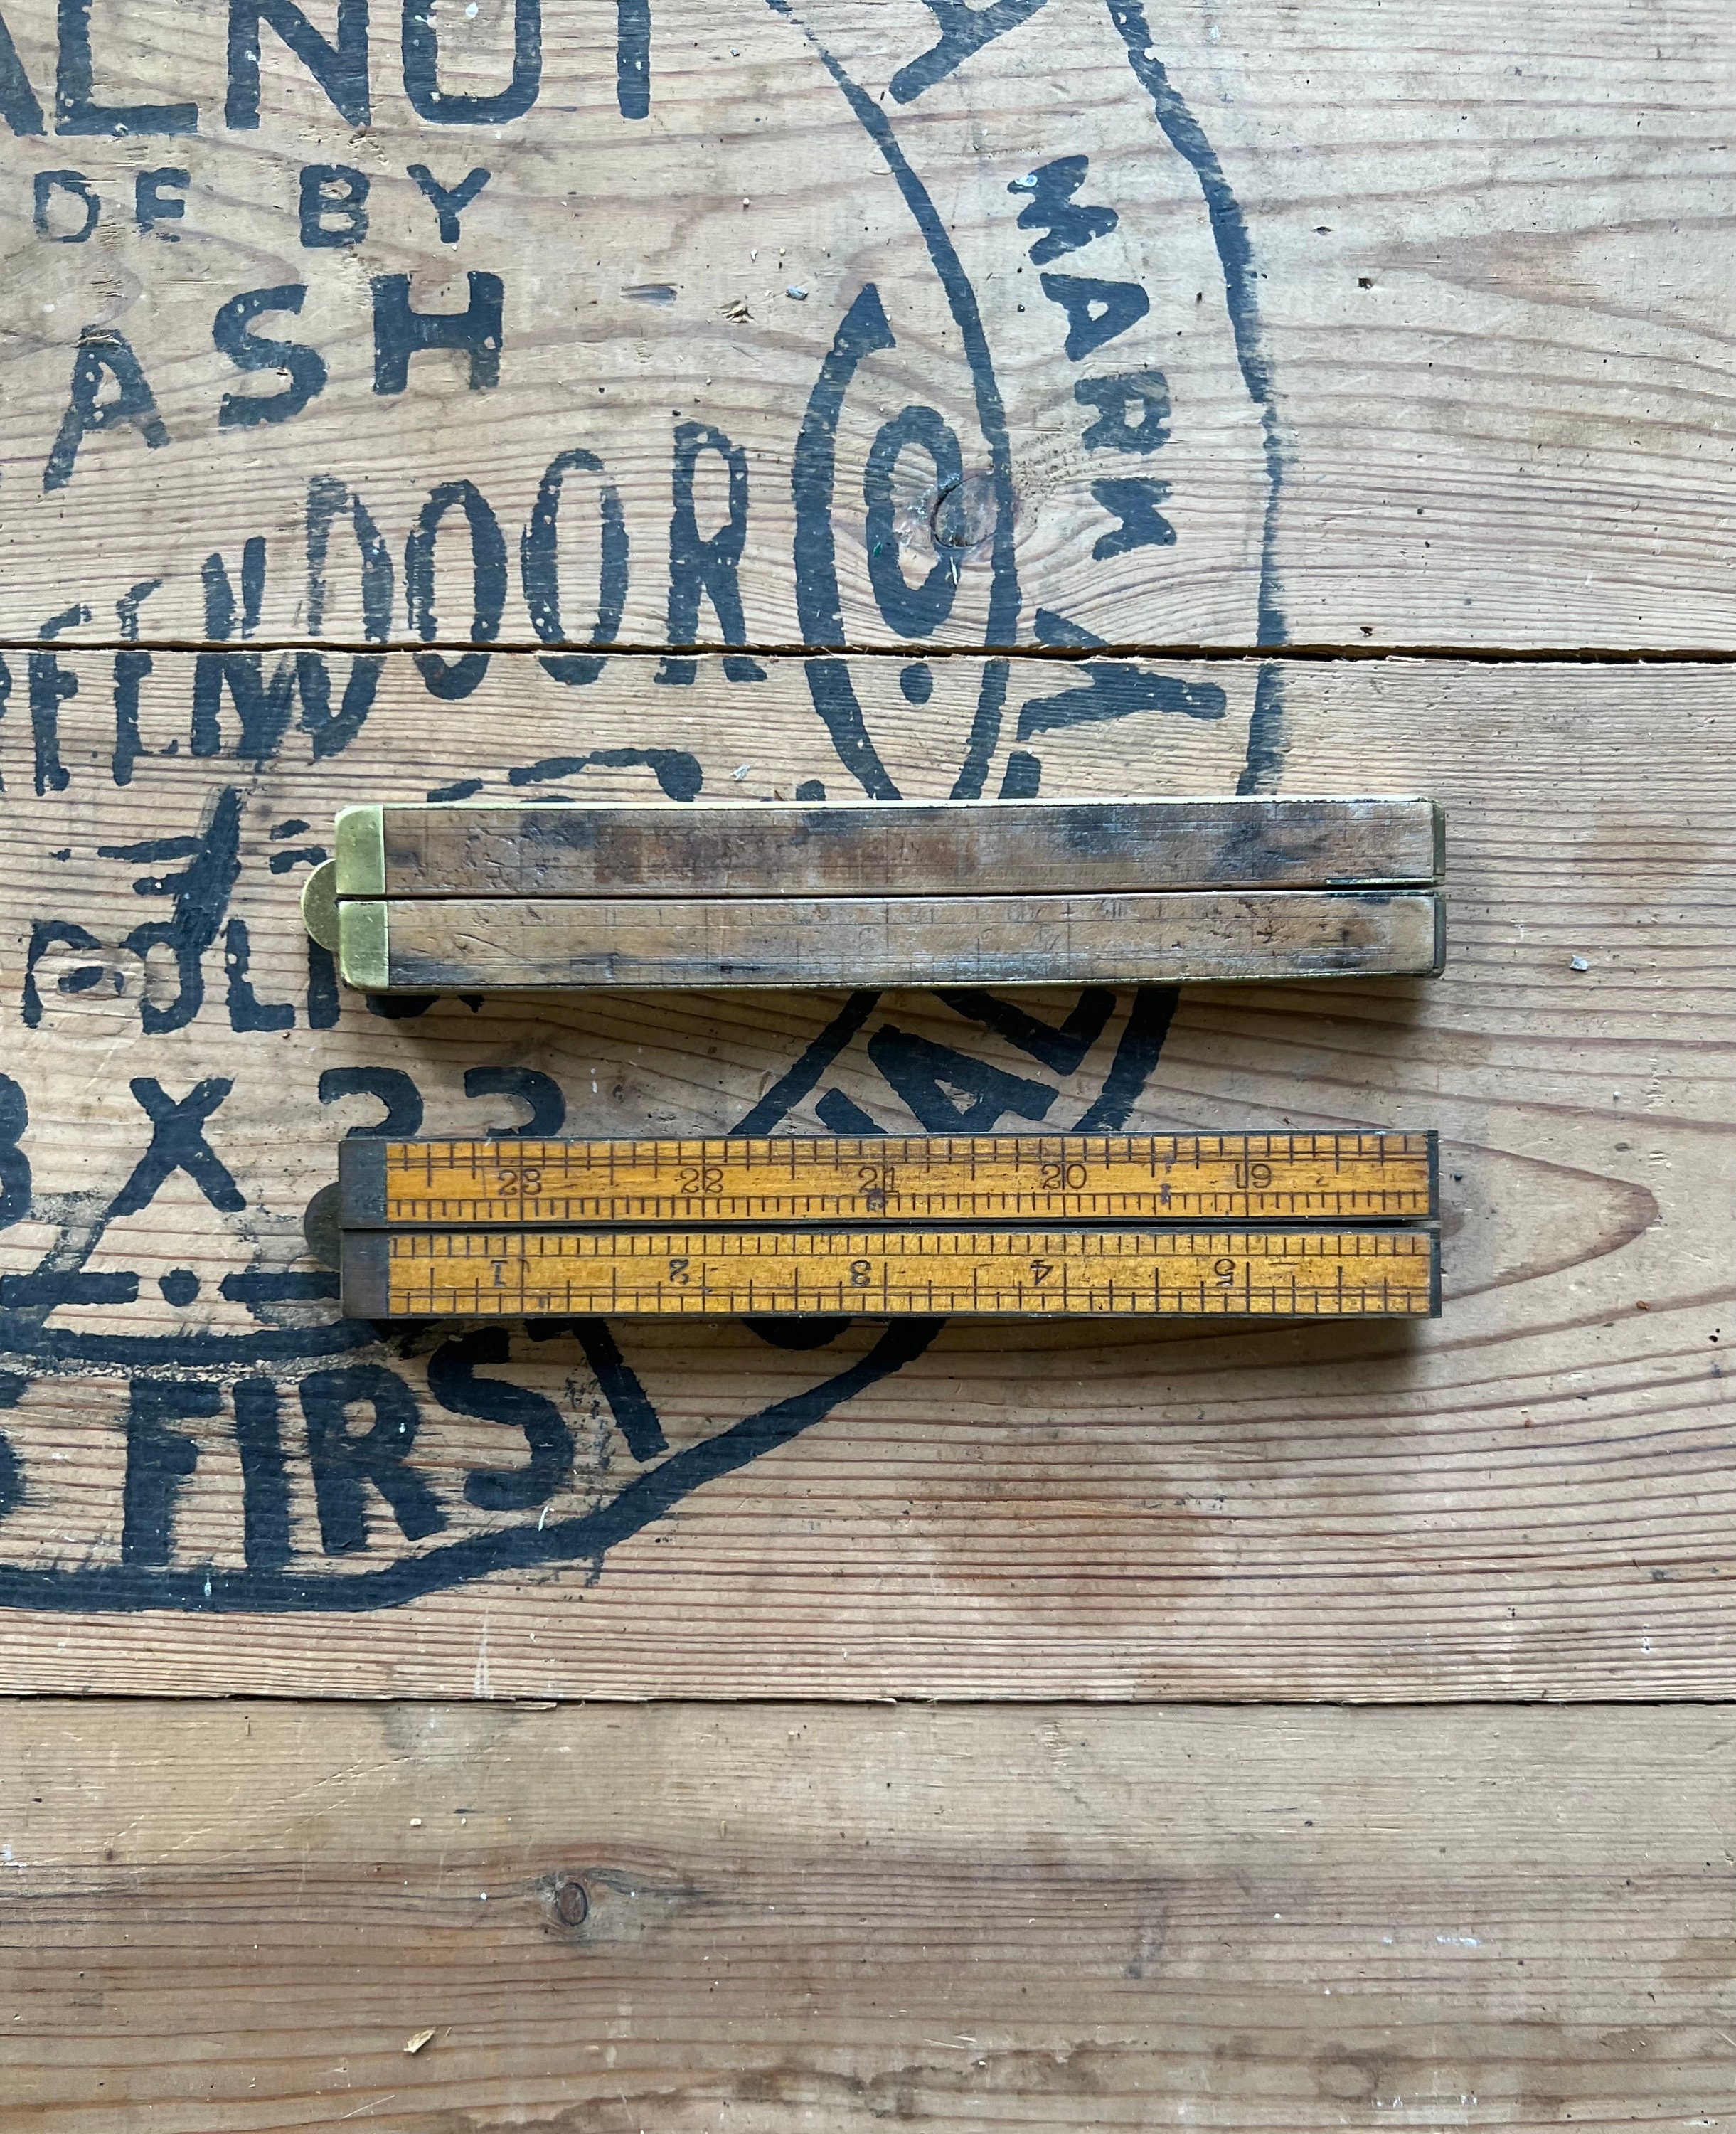 Vintage Wooden Rulers and Wooden Architects Scale/ Vintage Wood  Ruler/vintage Office/ Vintage School Supplies/ Vintage Advertising Rulers 